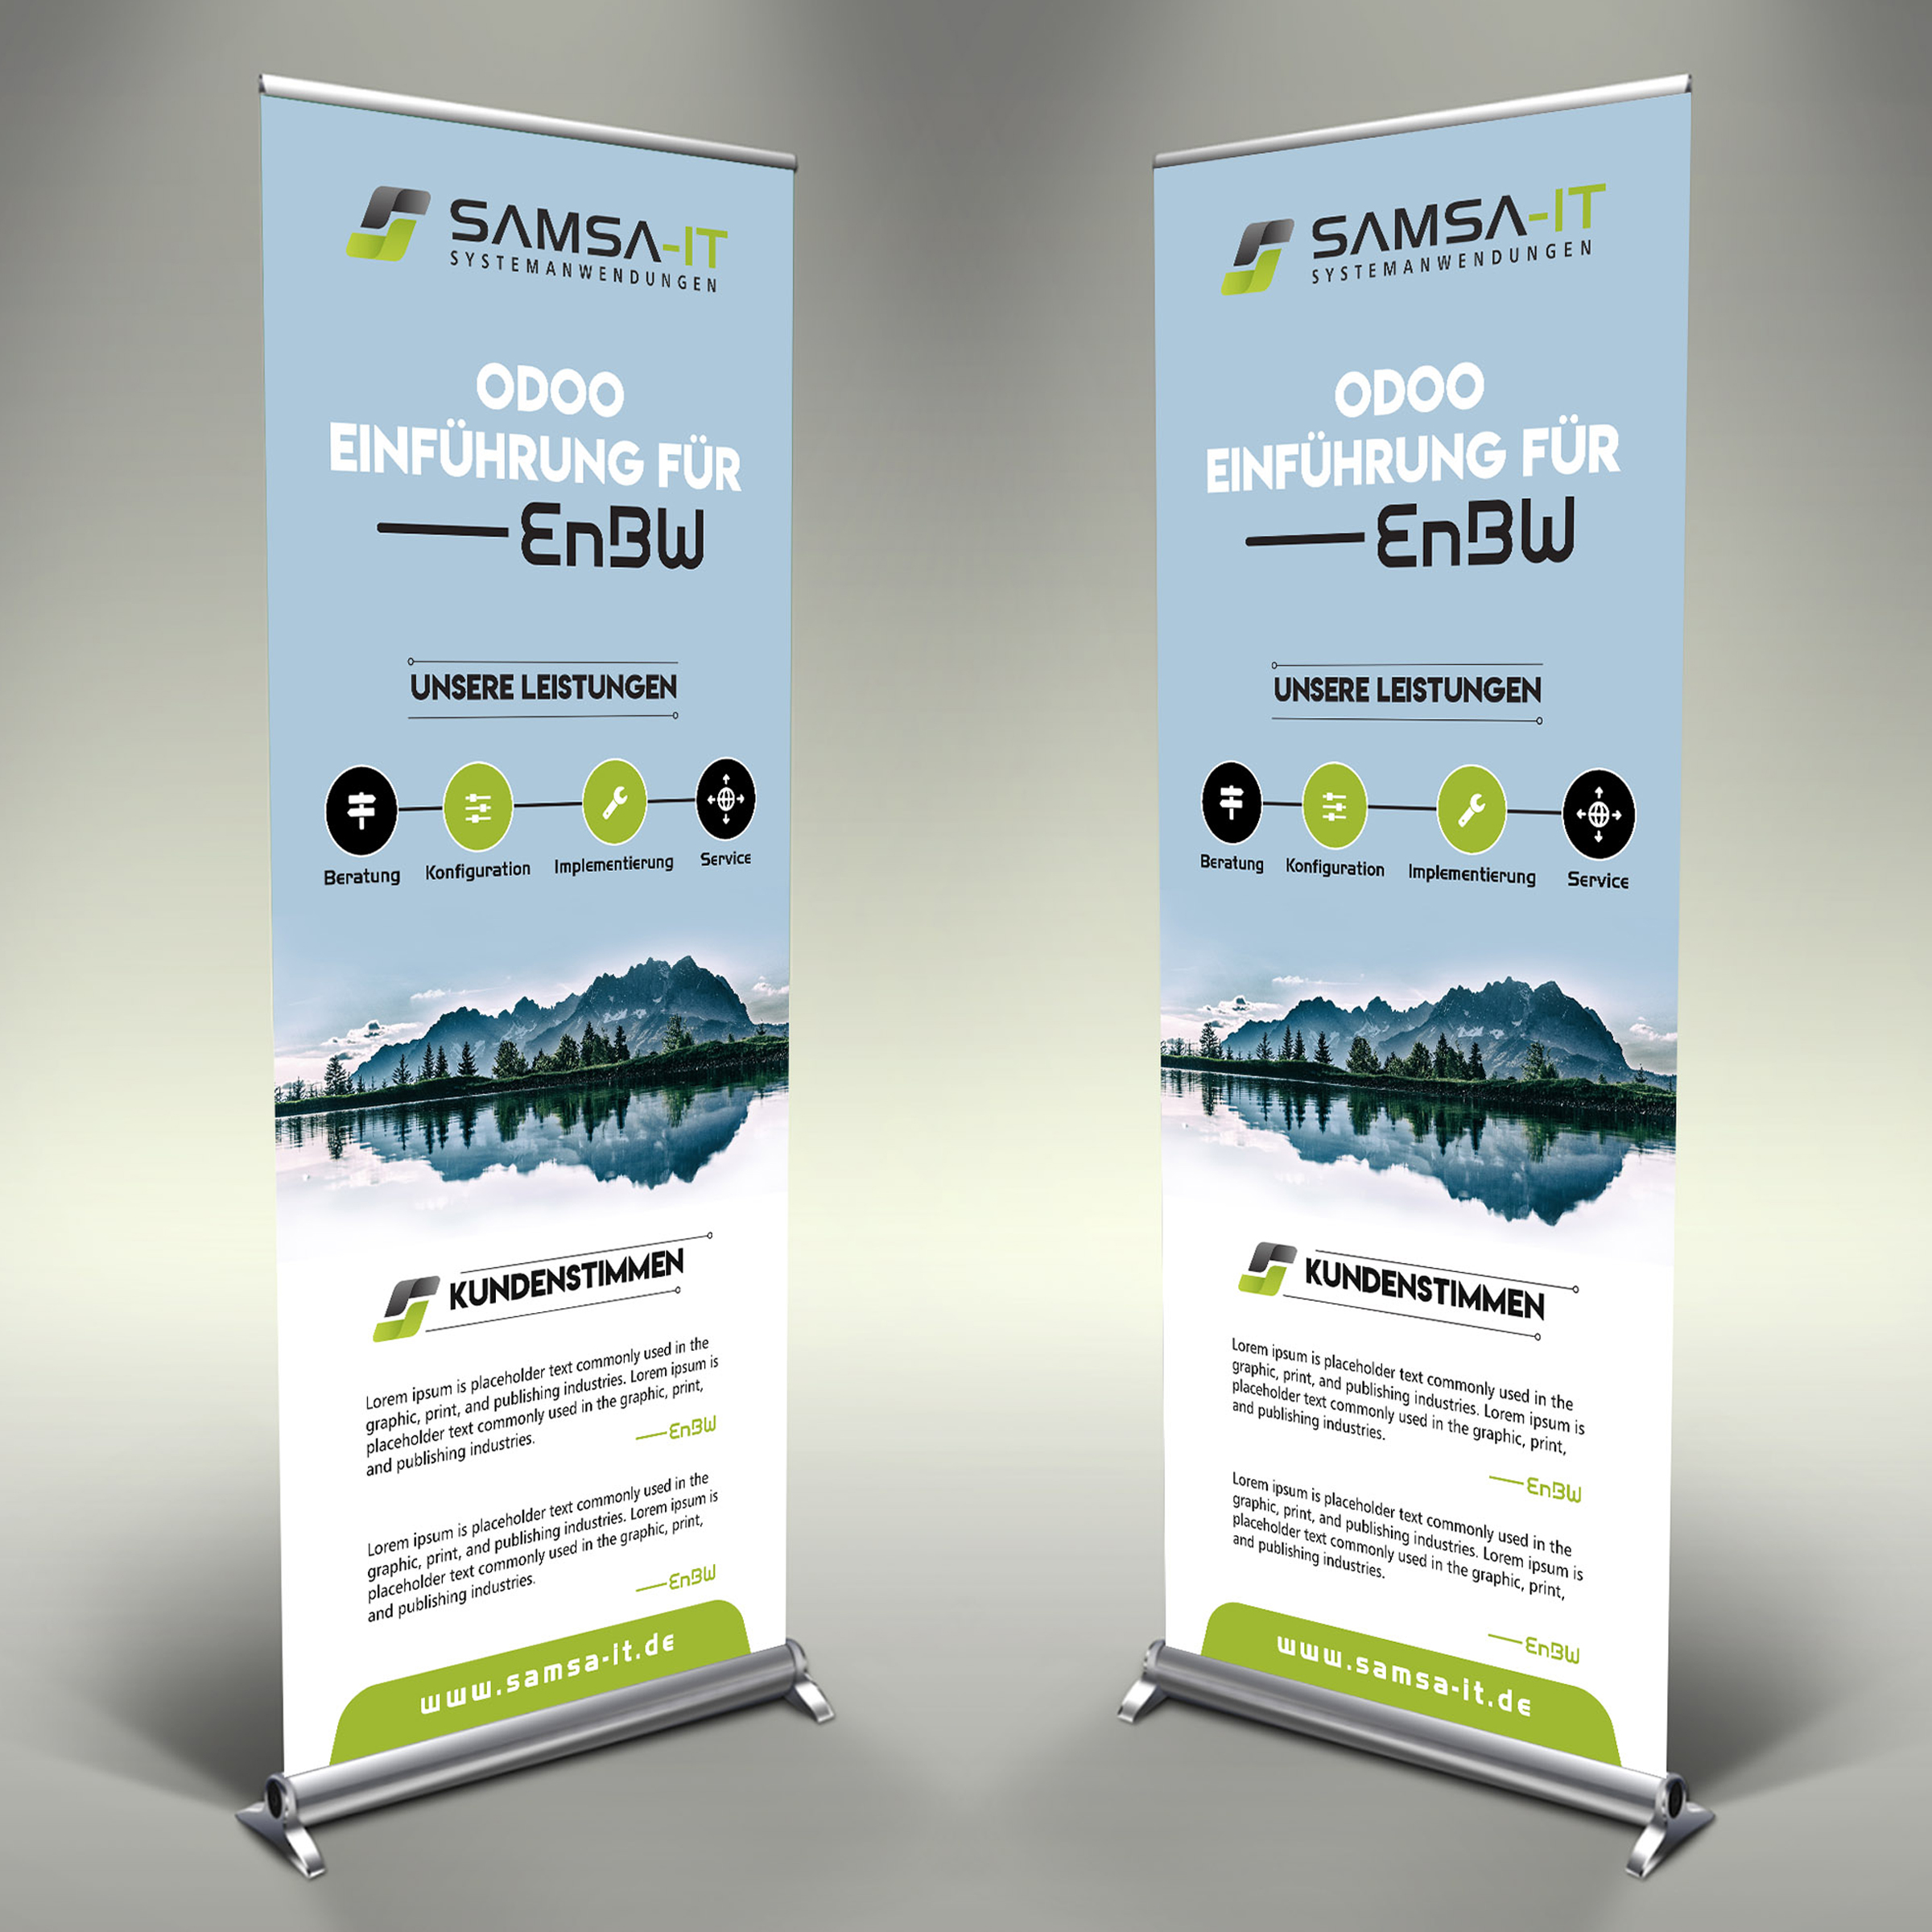 STANDEE DESIGNS FOR AN IT COMPANY